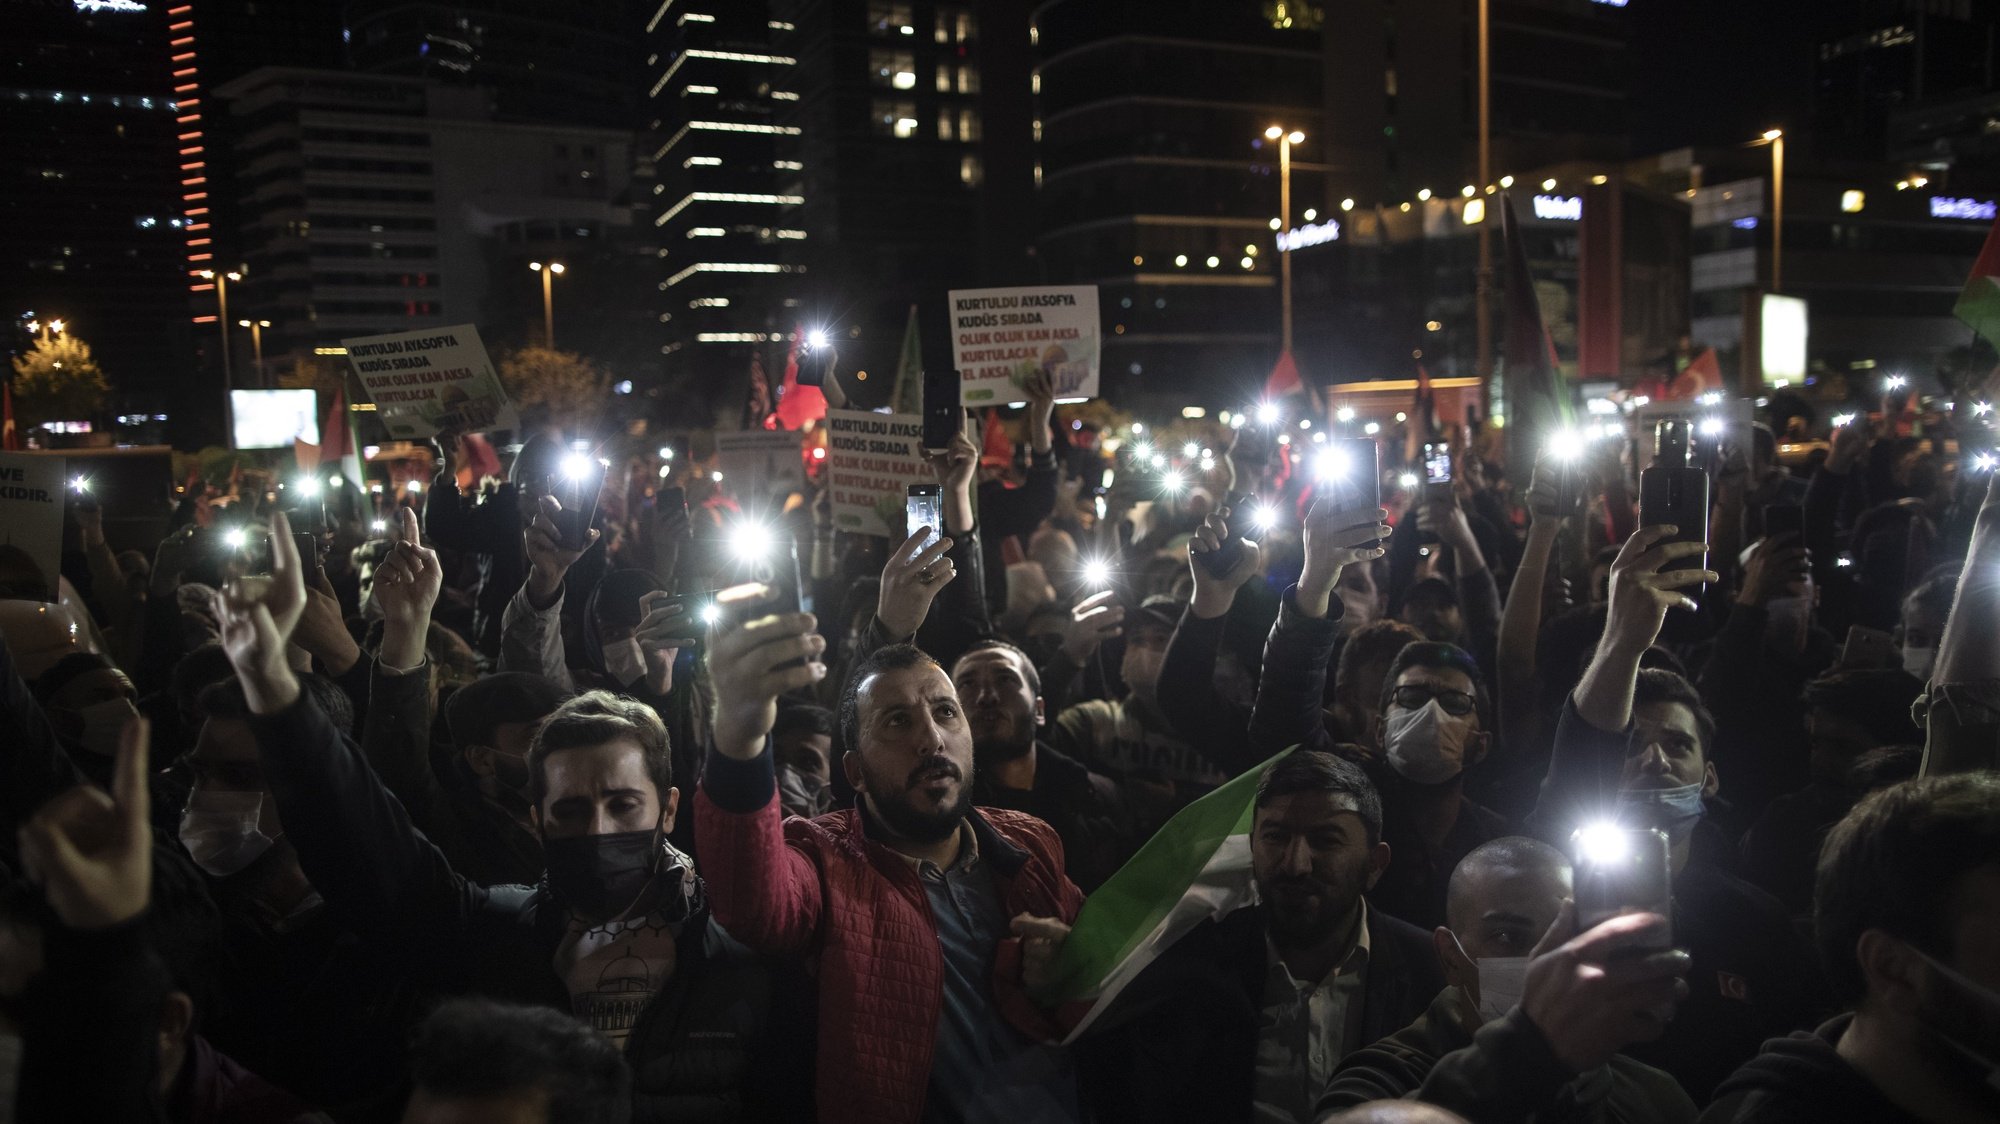 epa09188618 People hold phone lights and shout slogans during a protest against Israel in front of the Israel Consulate in Istanbul, Turkey, late 09 May 2021. The Israeli Supreme Court had postponed the 10 May hearing into the ruling by an Israeli court in East Jerusalem that ordered the forced eviction of six Palestinian families from their homes in Sheikh Jarrah neighborhood in favor of Jewish families who claimed they used to live in the houses before fleeing in the 1948 war that led to the creation of Israel. Thousands of Israelis, including right-wing groups, are expected to join the &#039;Flag March&#039; on 10 May which is considered &#039;Jerusalem Day&#039;, an Israeli national holiday that celebrates the establishment of Israeli control over the Old City in the aftermath of the June 1967 Six-Day War. The Flag March route goes through the old city quarters and Damascus gate, ending at the Western Wall.  EPA/ERDEM SAHIN